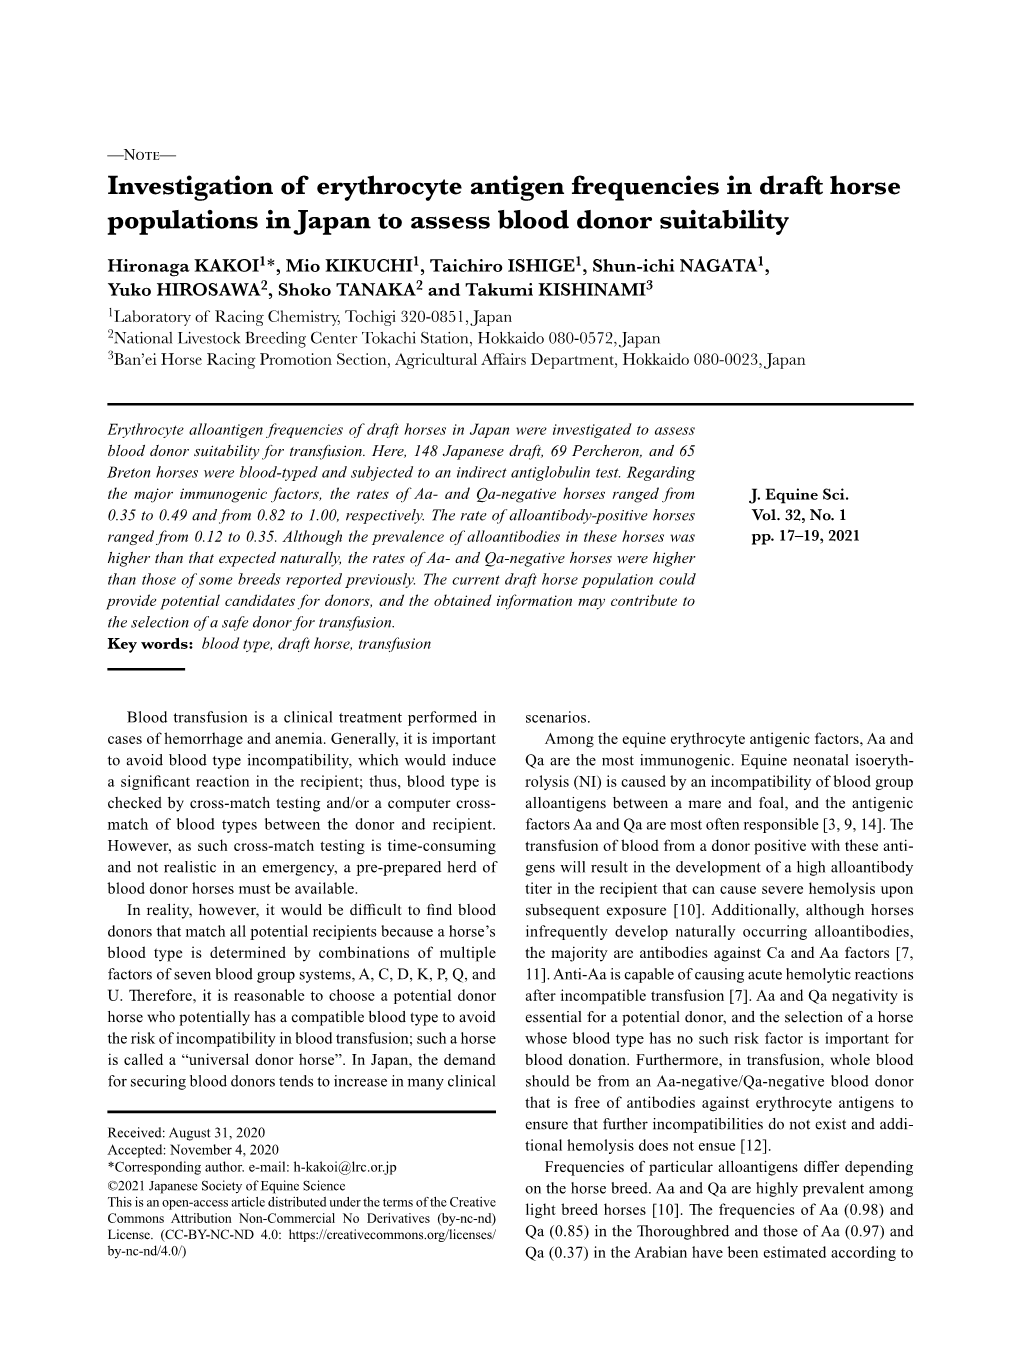 Investigation of Erythrocyte Antigen Frequencies in Draft Horse Populations in Japan to Assess Blood Donor Suitability